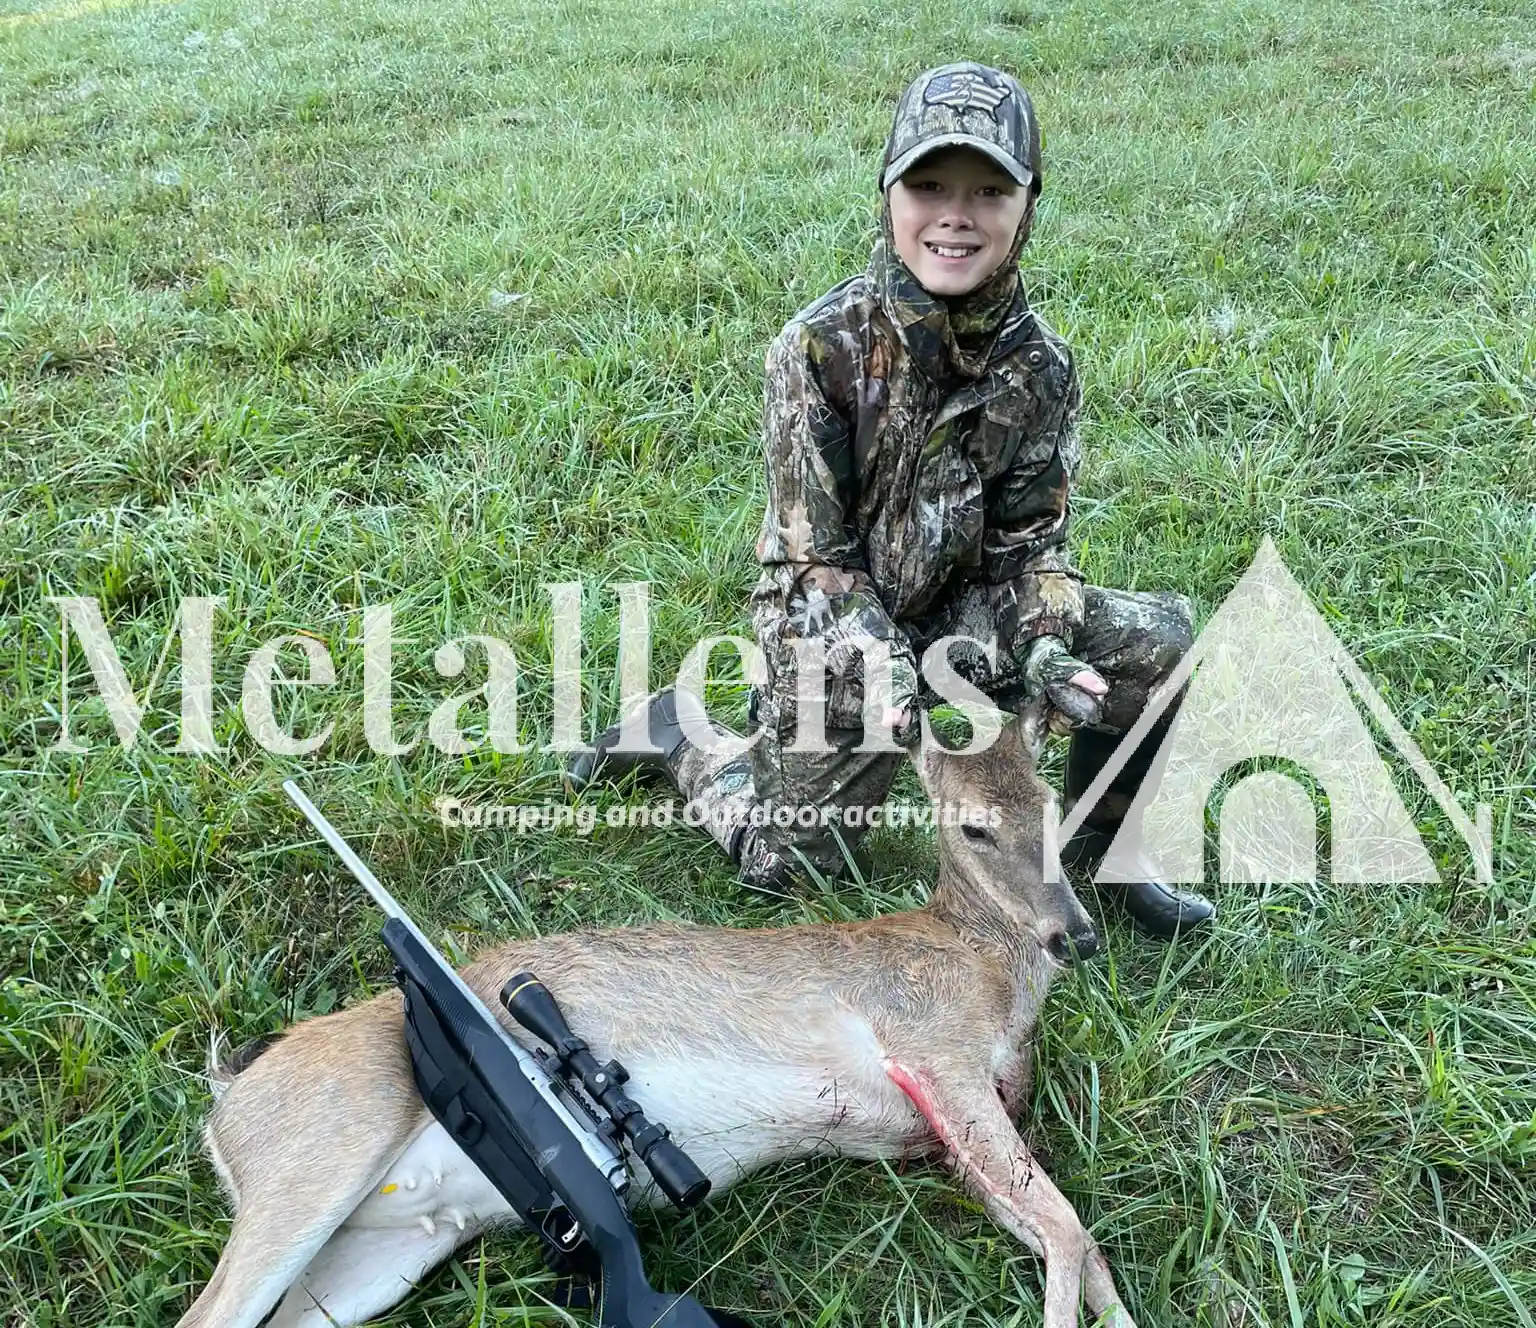 Considerations for Selecting the Best Scope for Deer Hunting